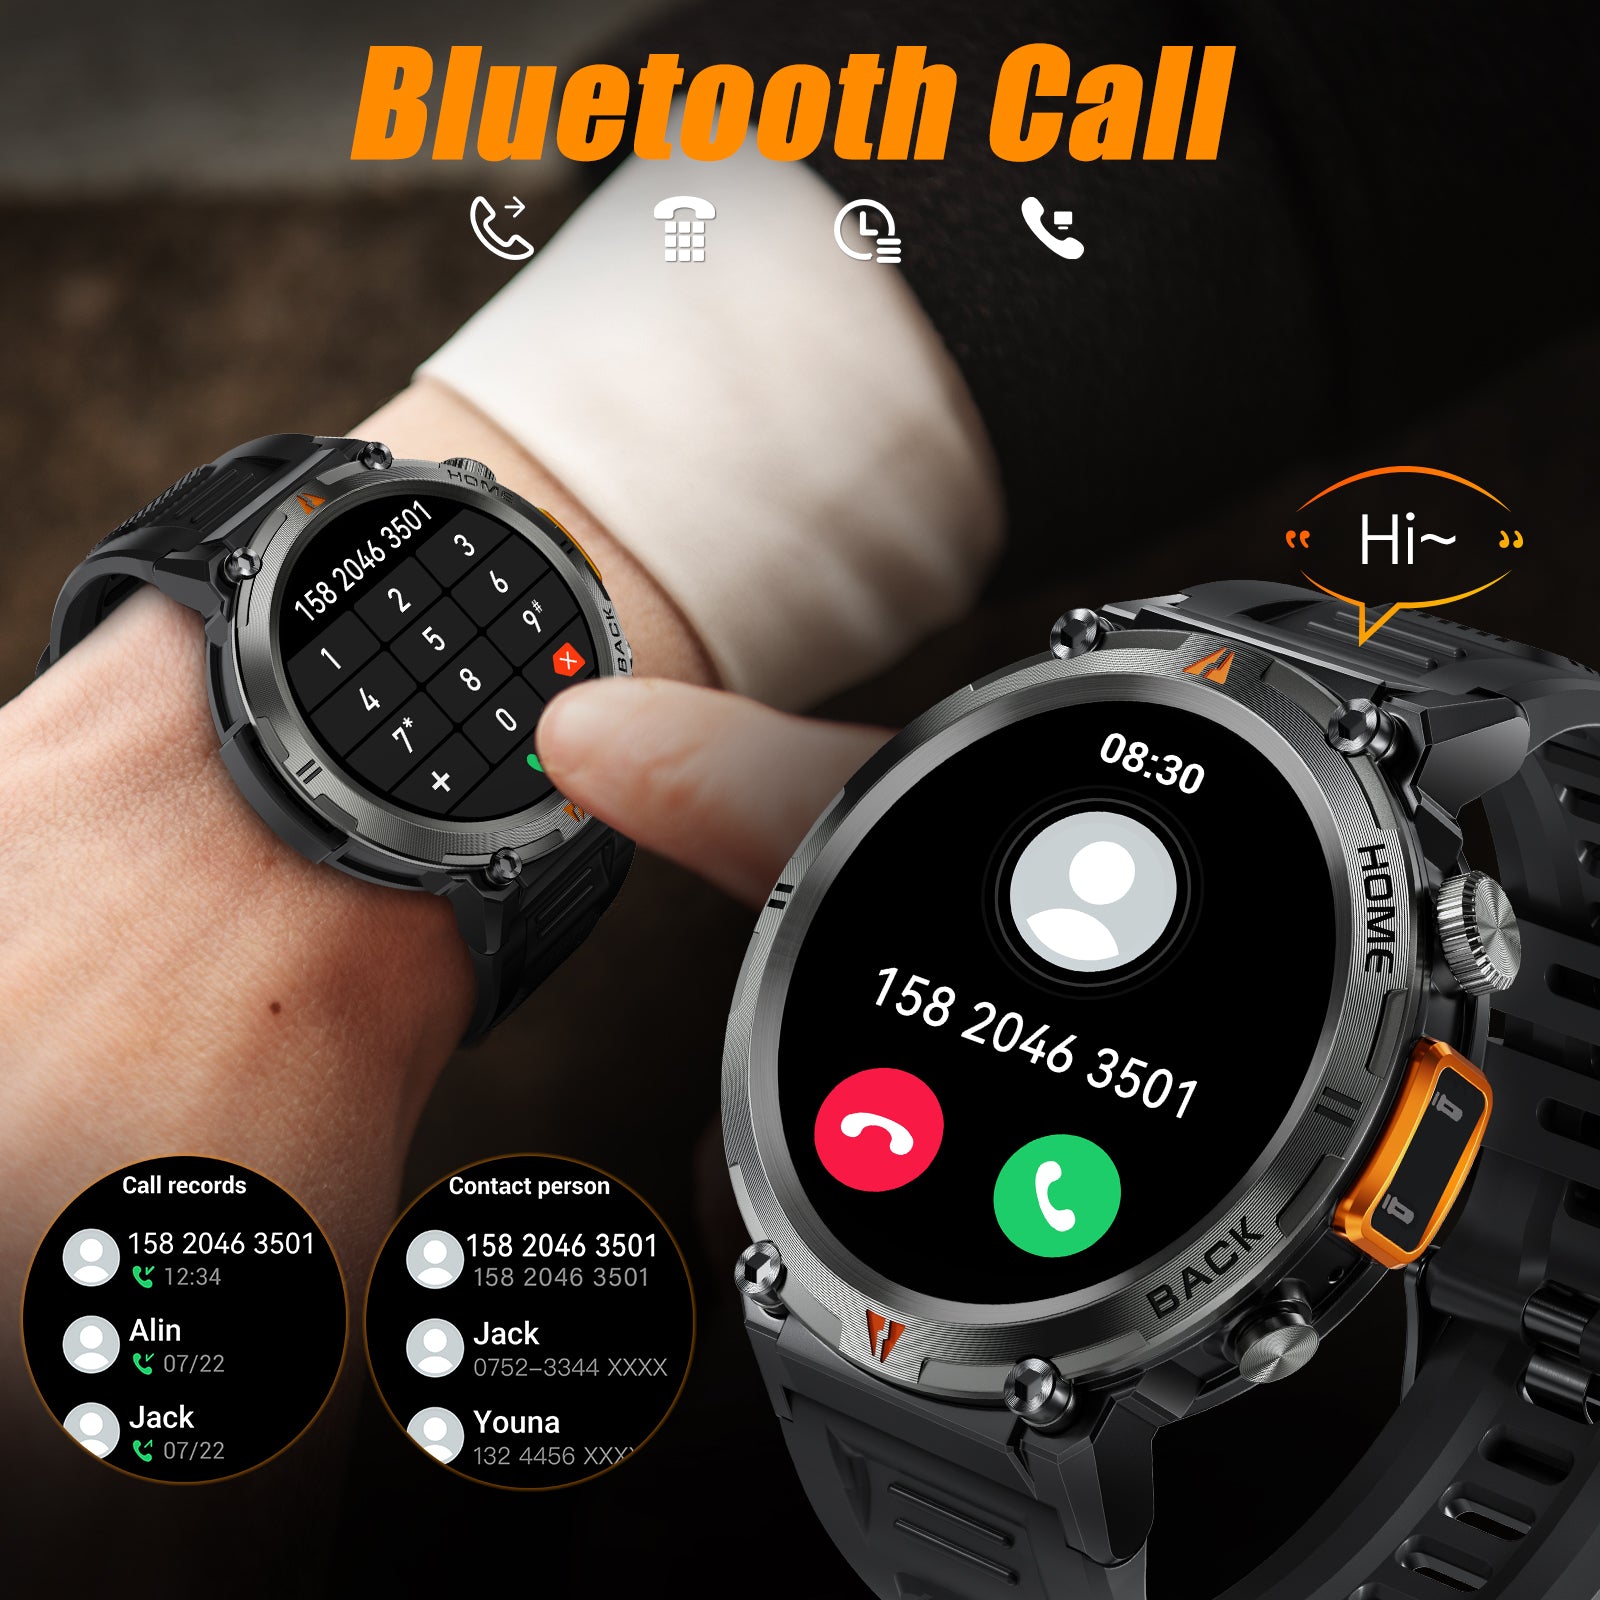 2024 New EIGIIS KE3 Smart Watch Bluetooth Calling with Flashlight Men's  Military 3ATM Waterproof Men's Full Touch Screen Health Monitoring Clock  for IOS Android